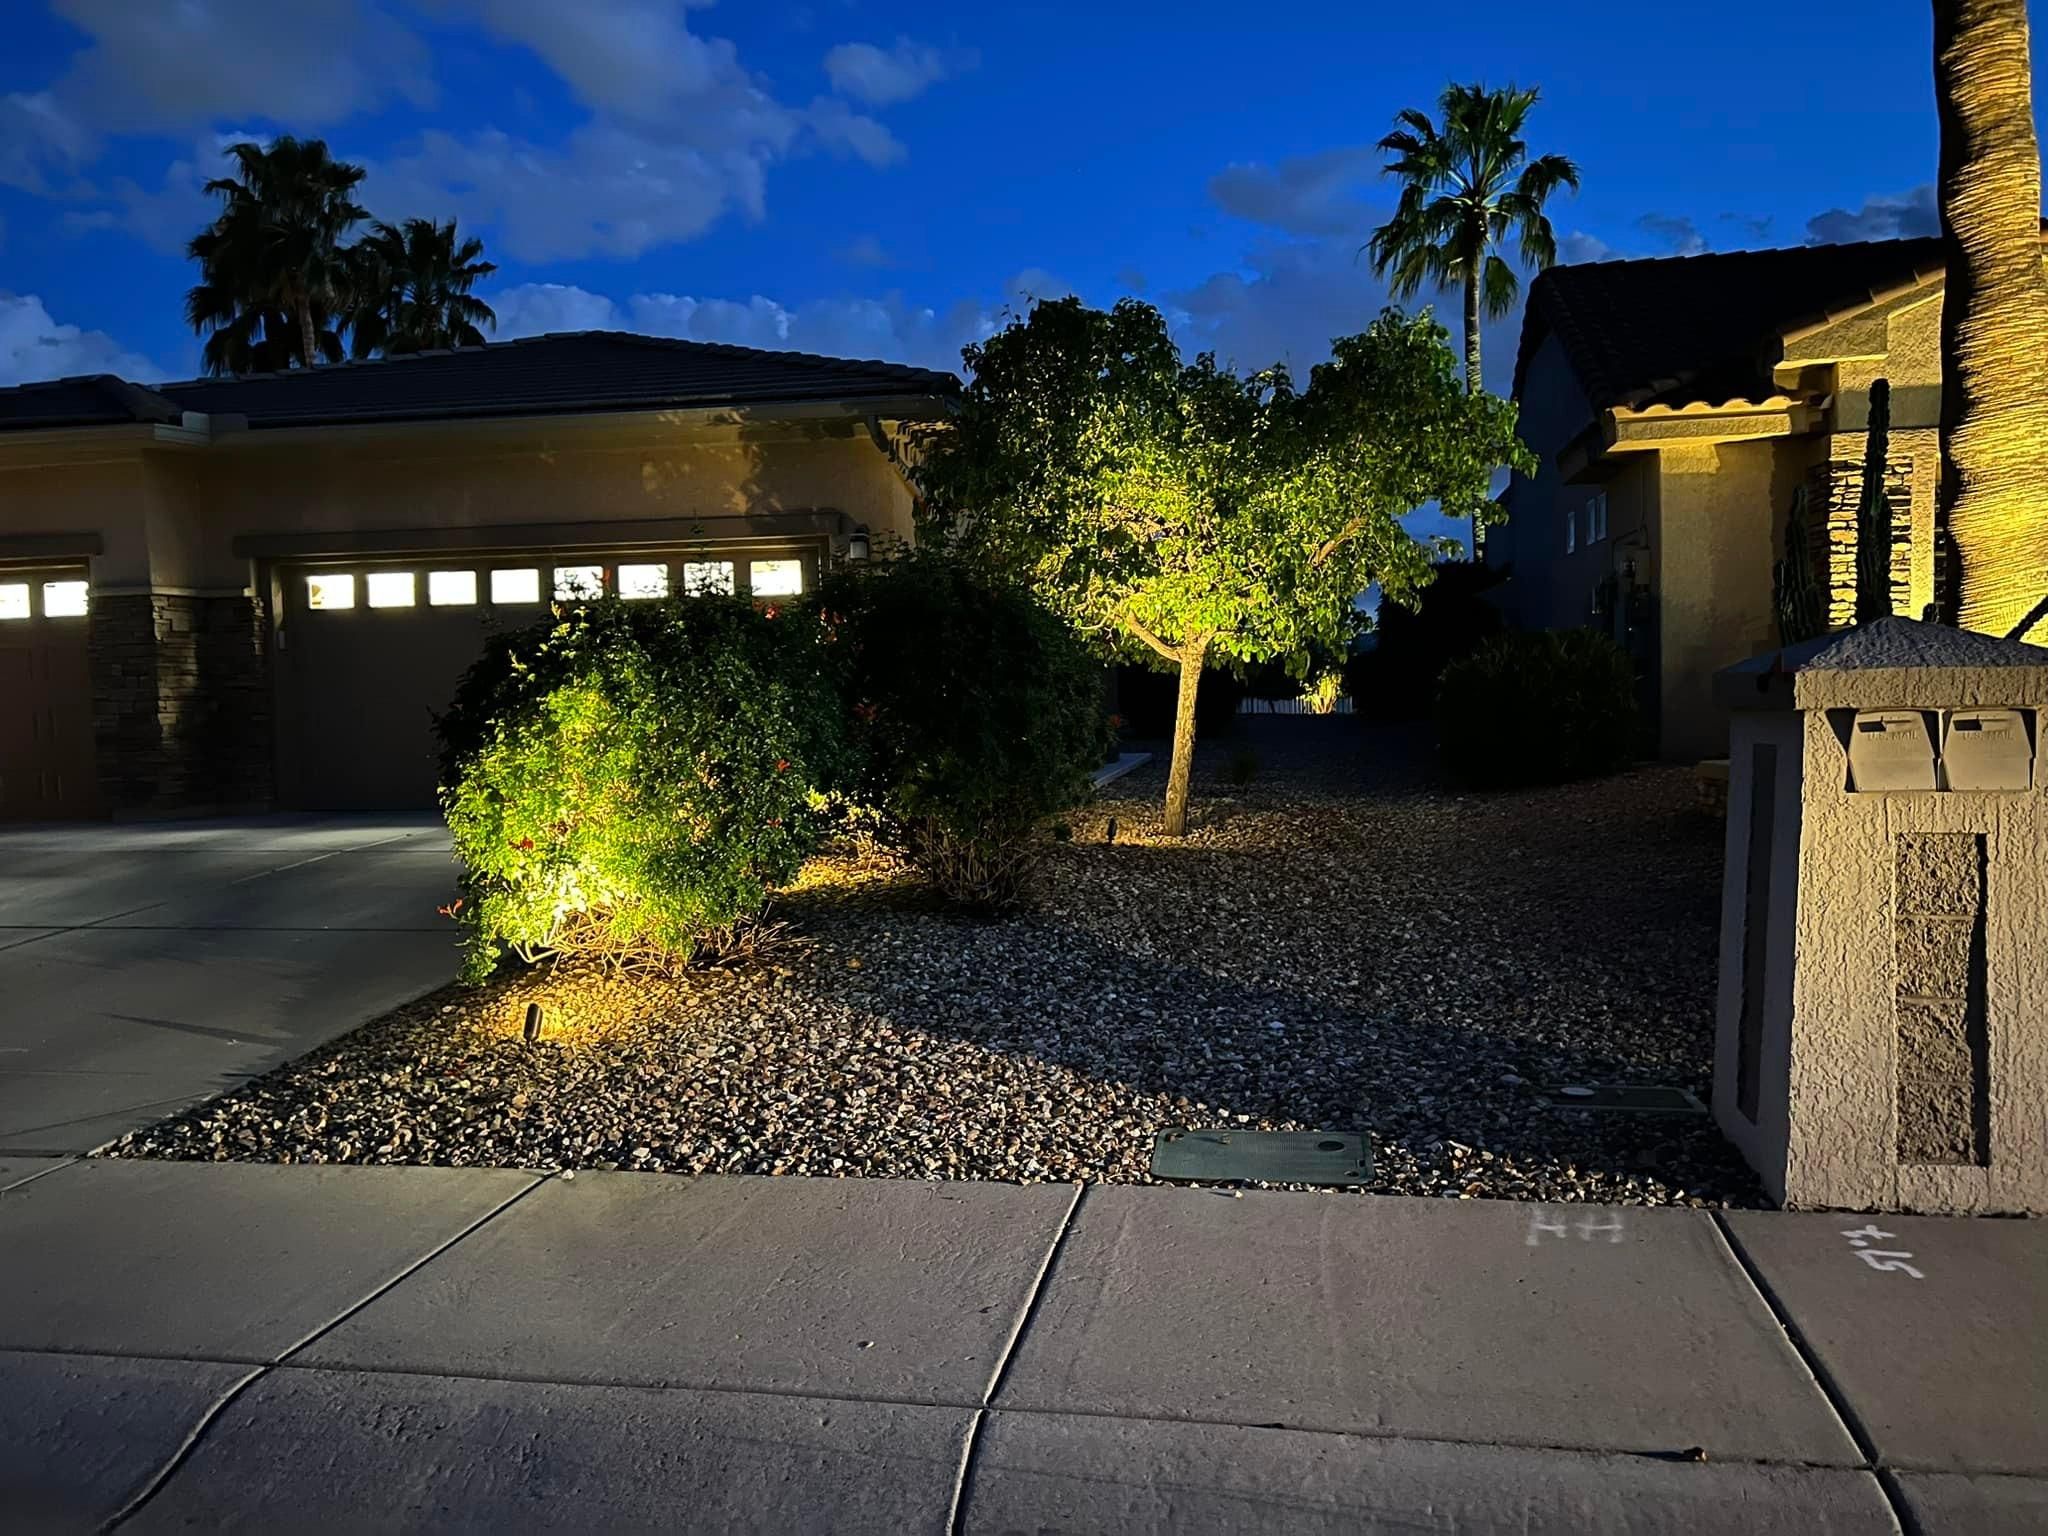 All Photos for Atmospheric Irrigation and Lighting  in Sun City, Arizona